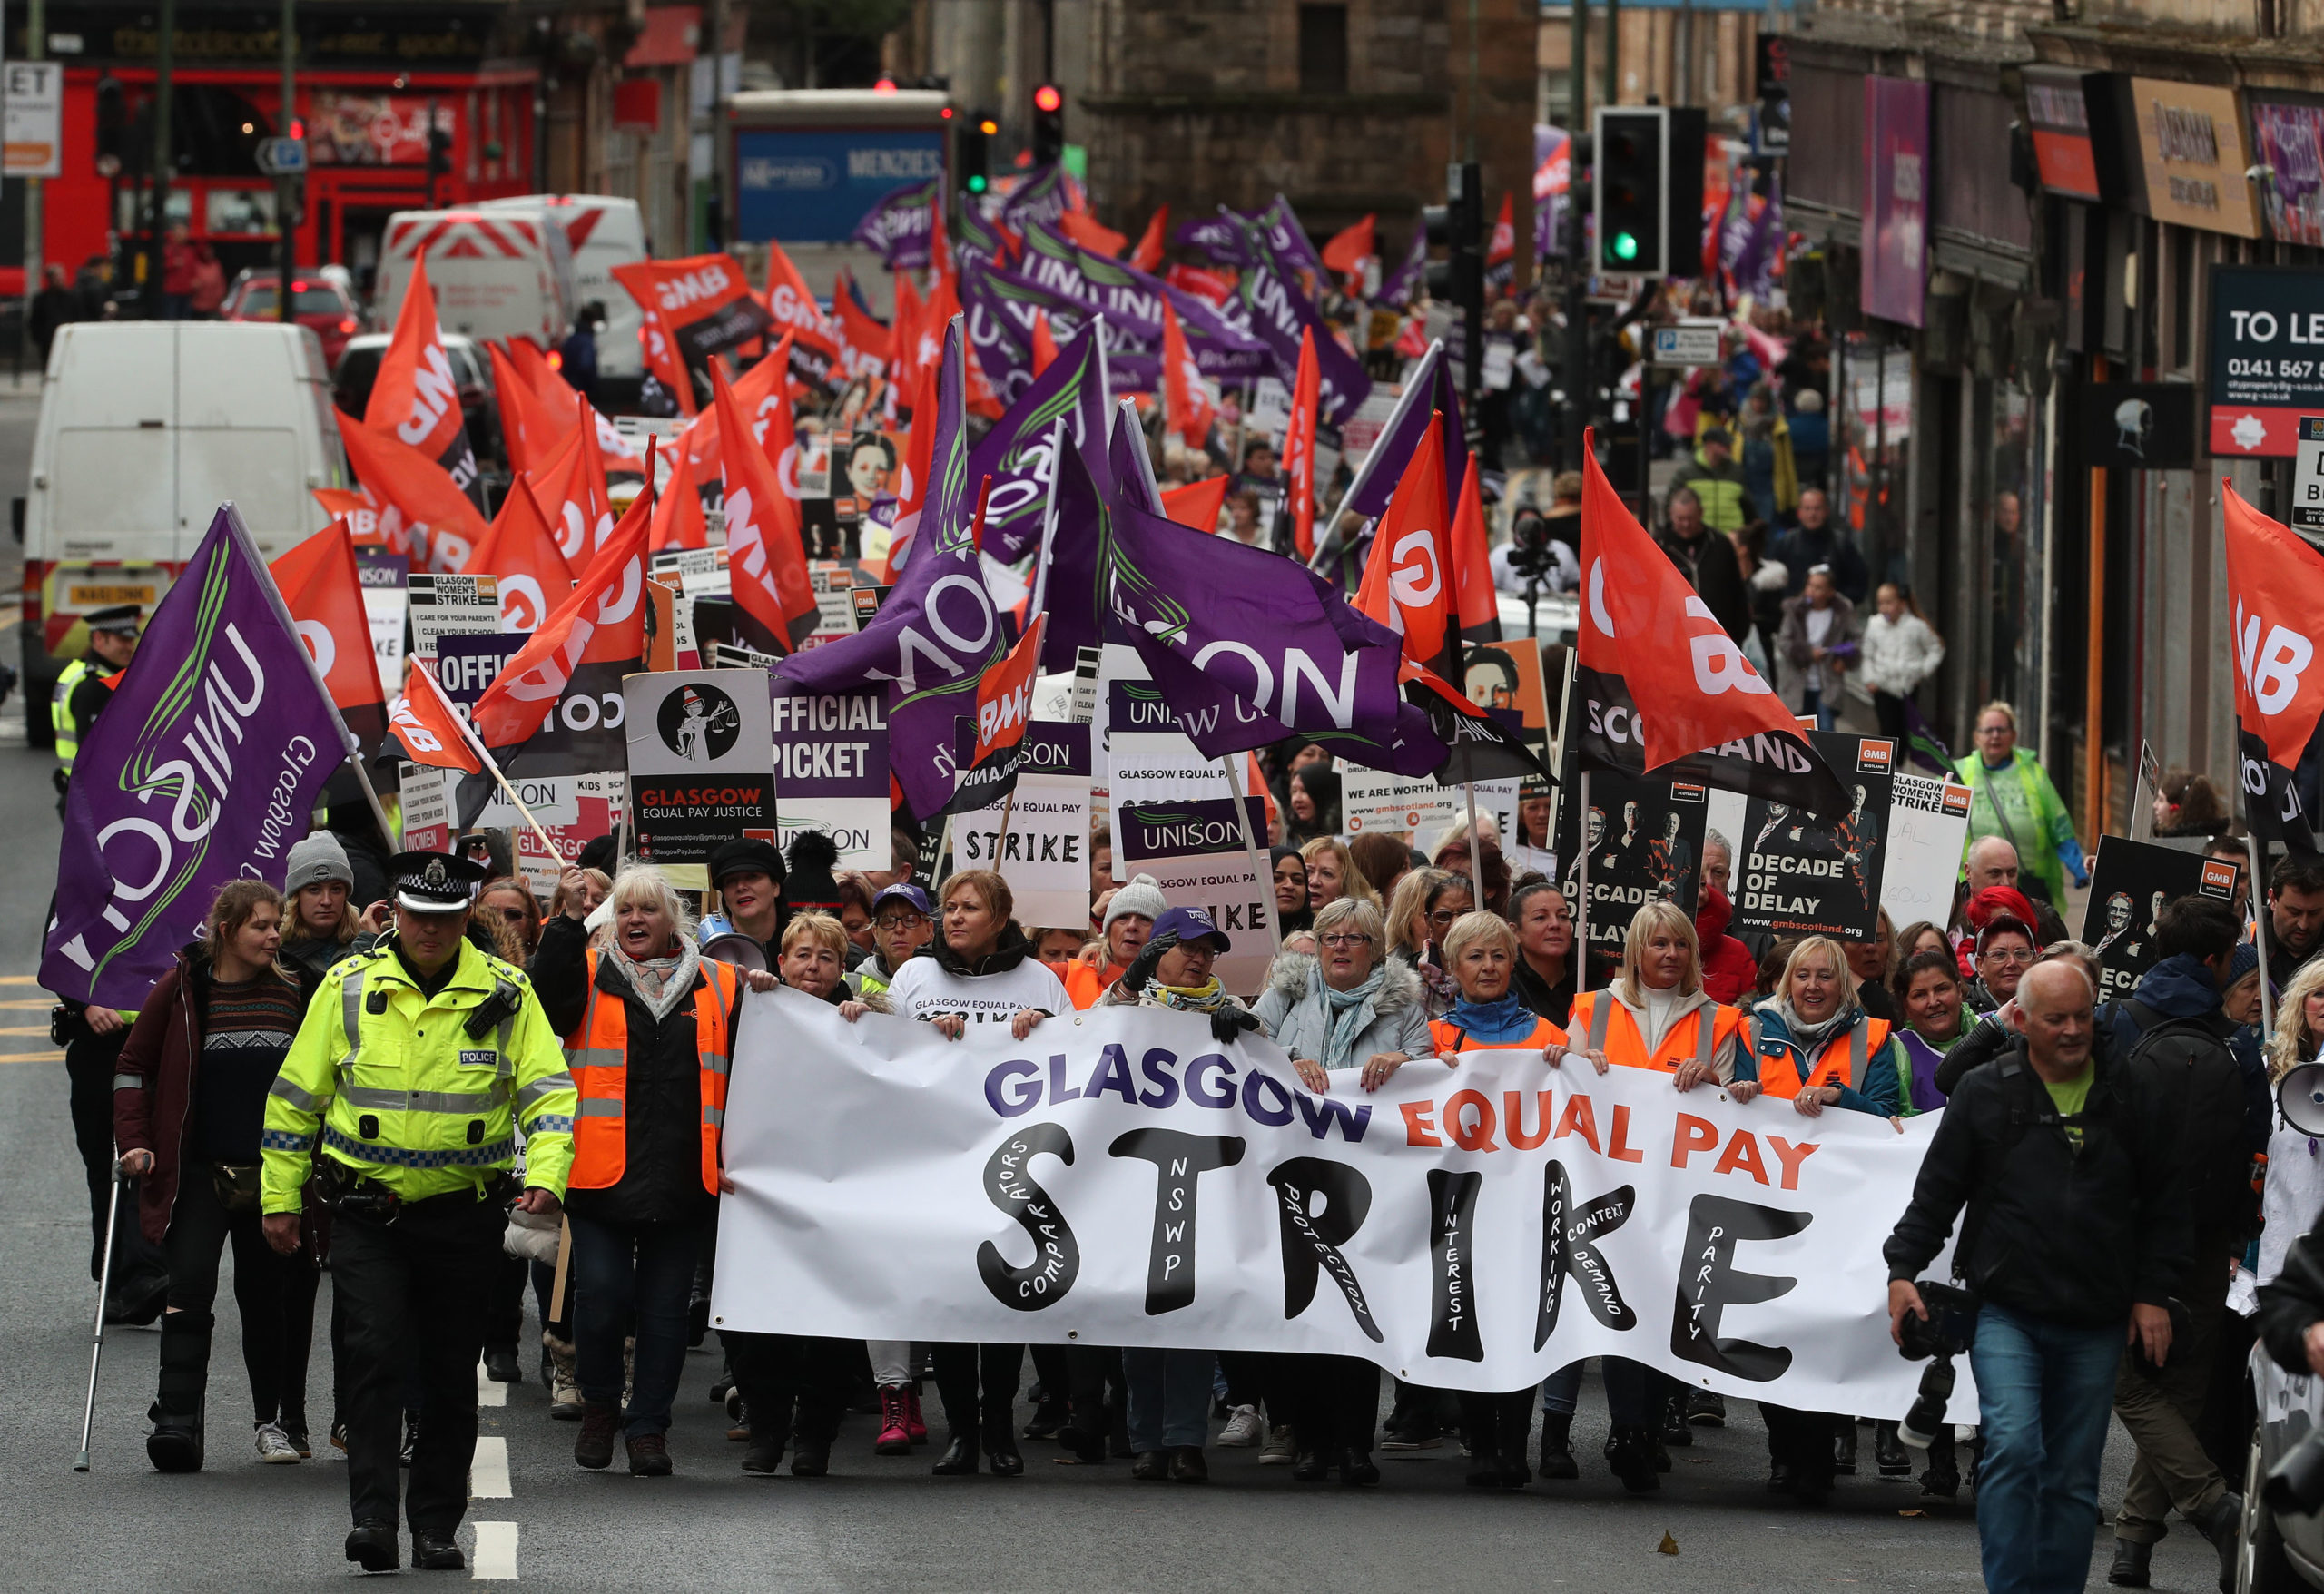 Equal pay marchers at a Glasgow demonstration